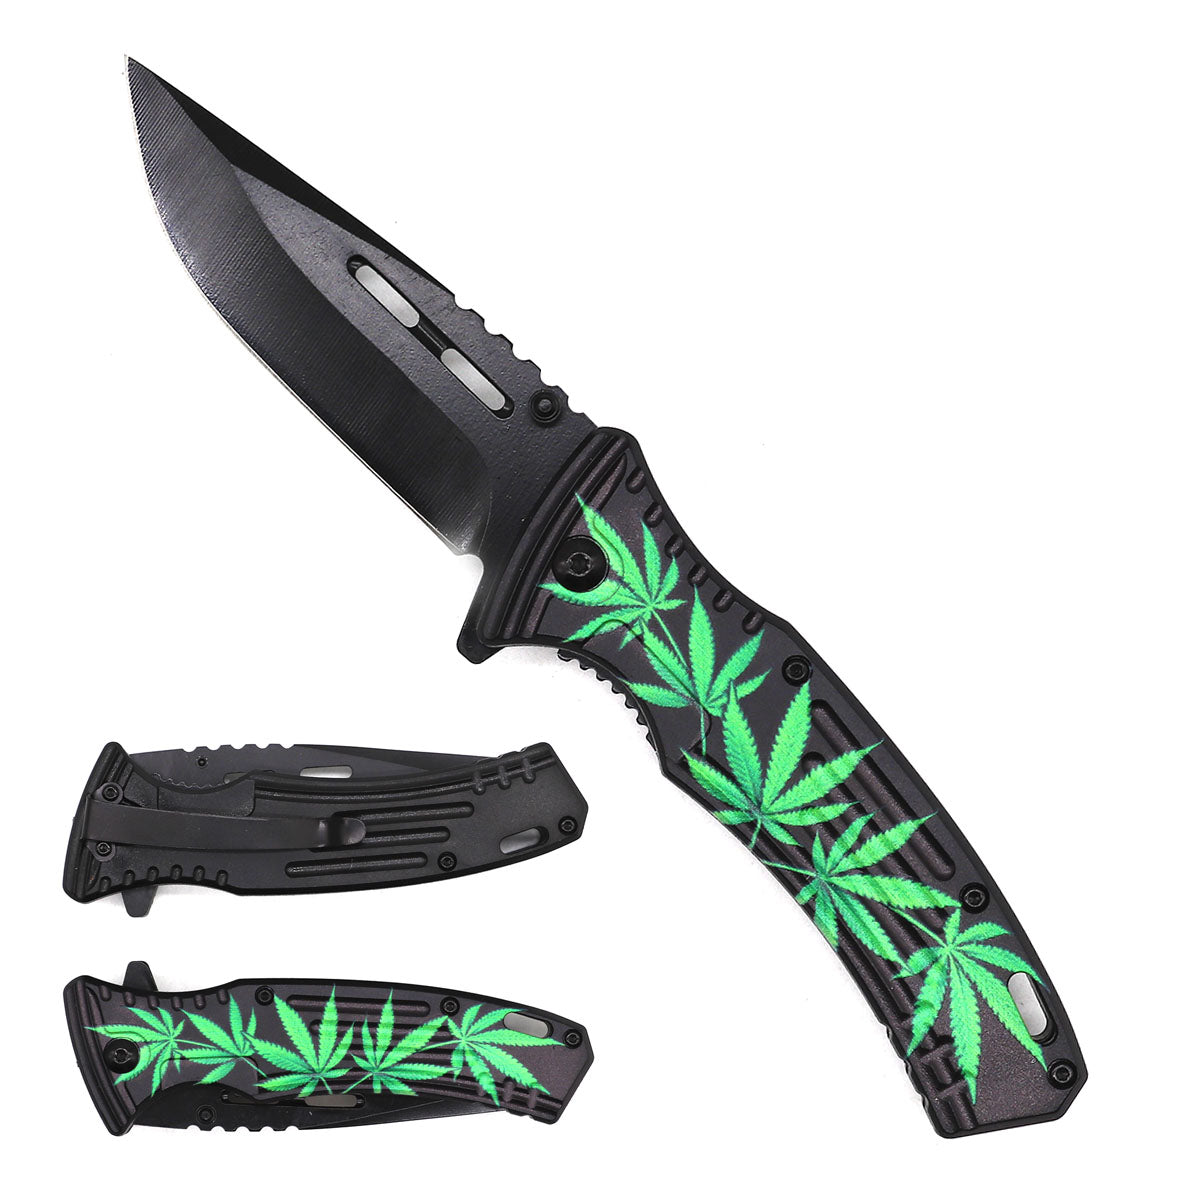 7.75" Overall spring assisted knife Marijuana Handle